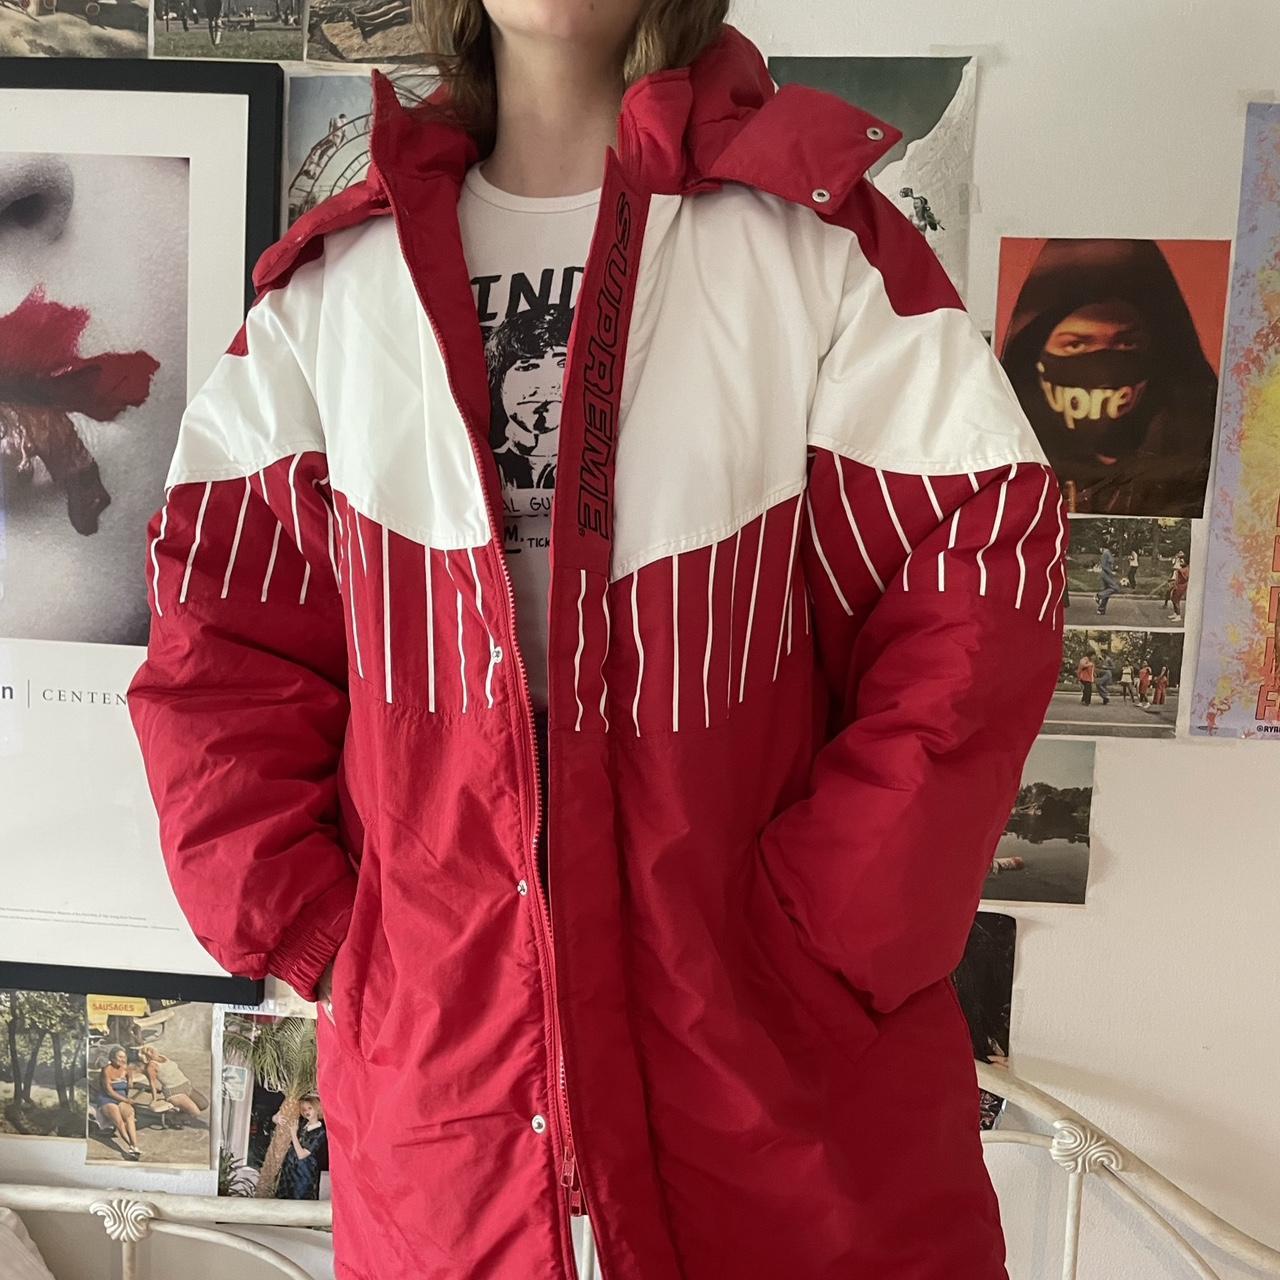 Red supreme jacket. White and red coat. Hype beast.